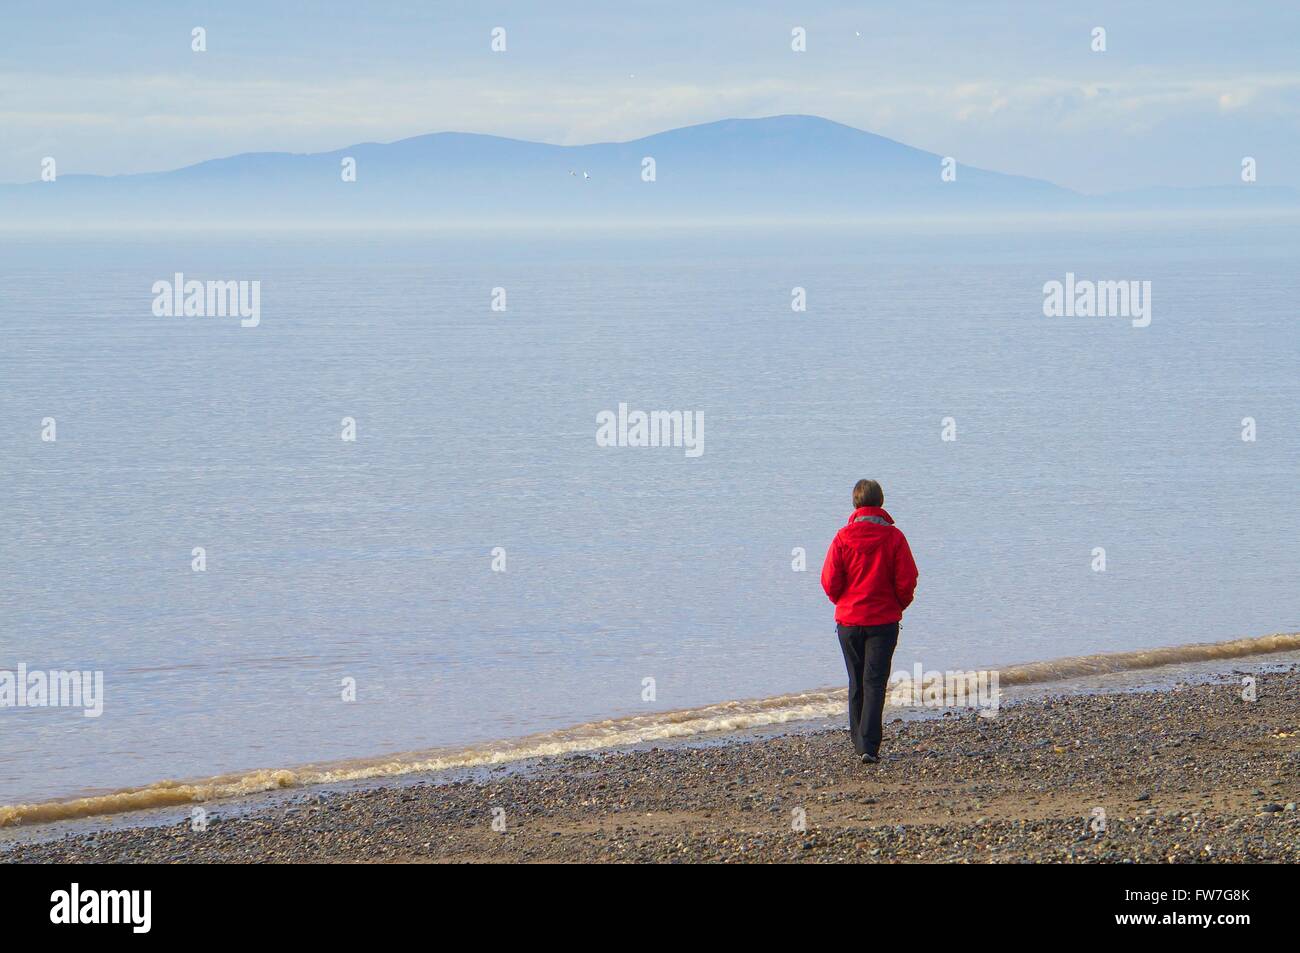 Lonely Woman walking on beach with Criffel in distance. Allonby, Cumbria, England, United Kingdom, Europe. Stock Photo